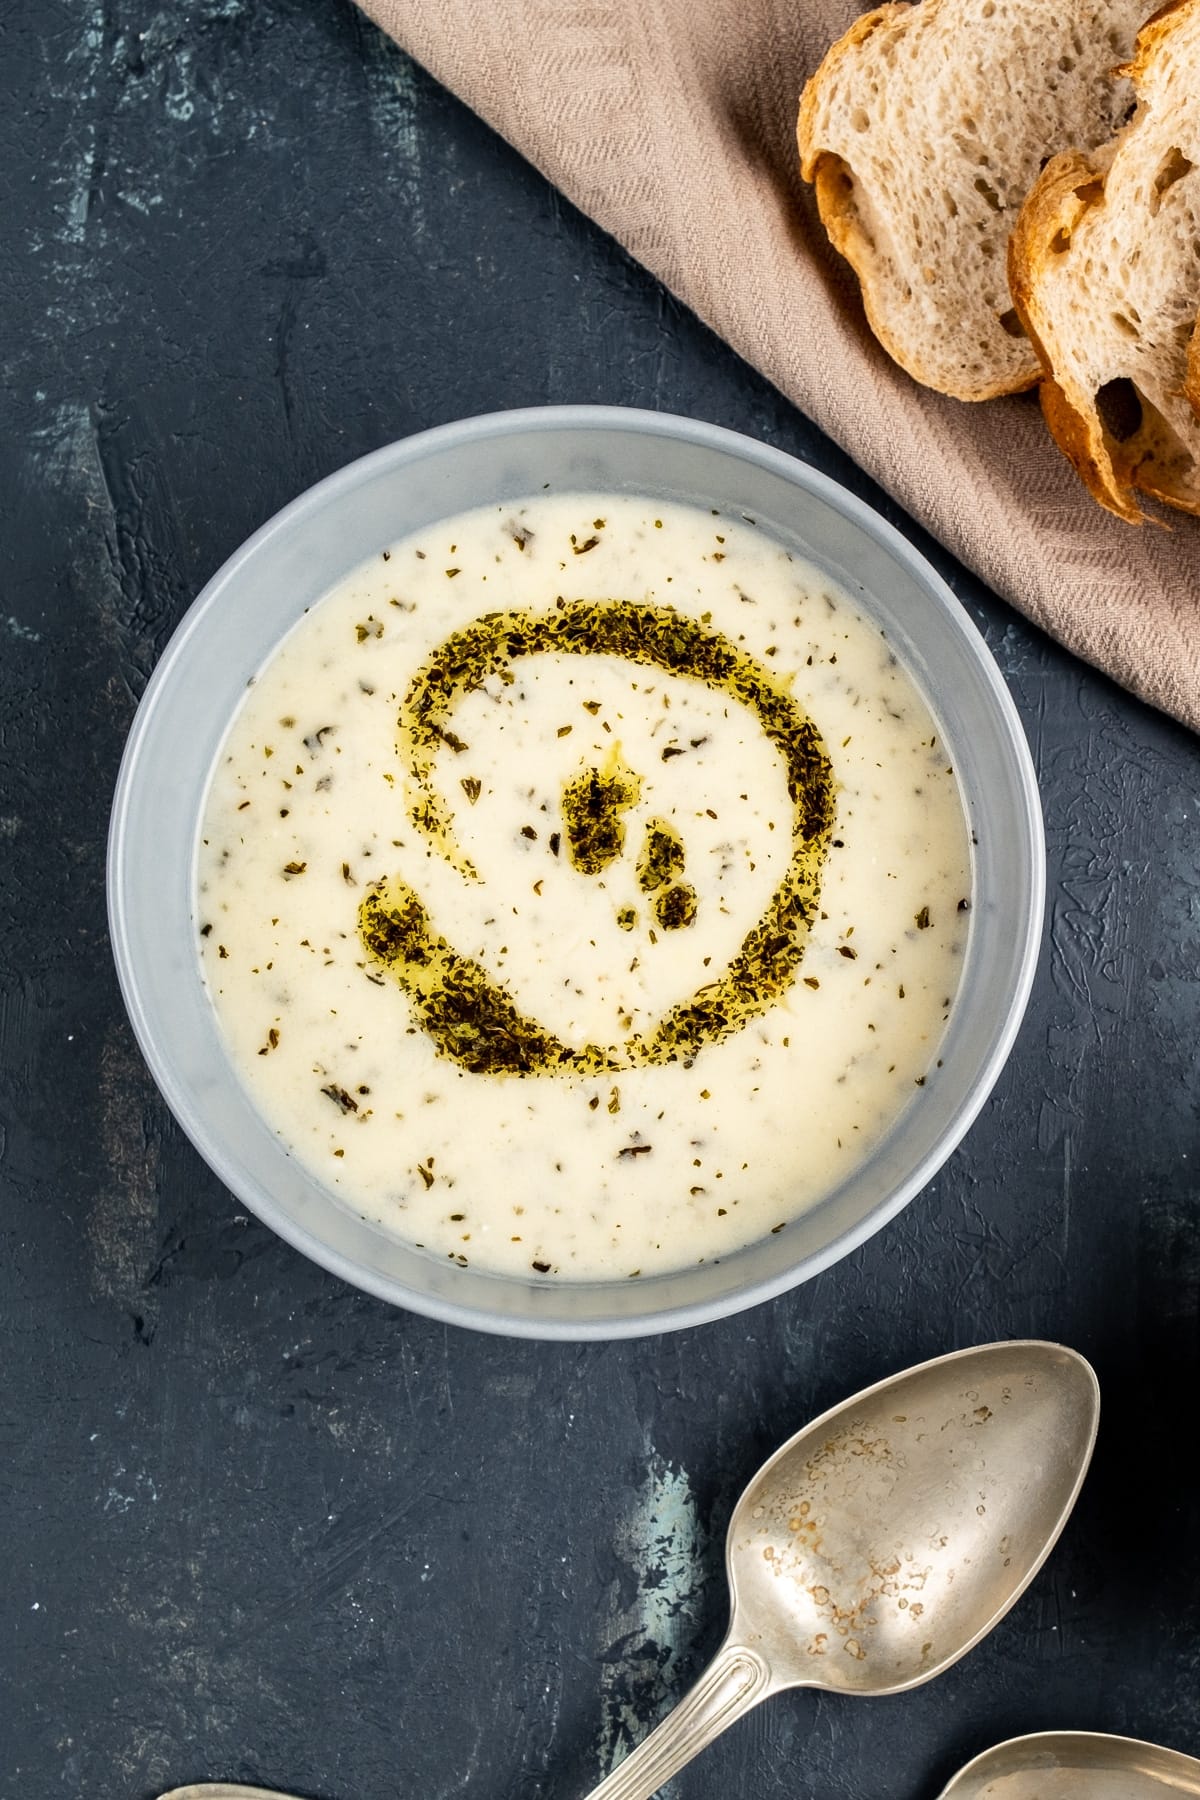 Yogurt soup with rice with a butter mint topping in a grey bowl on a dark background.